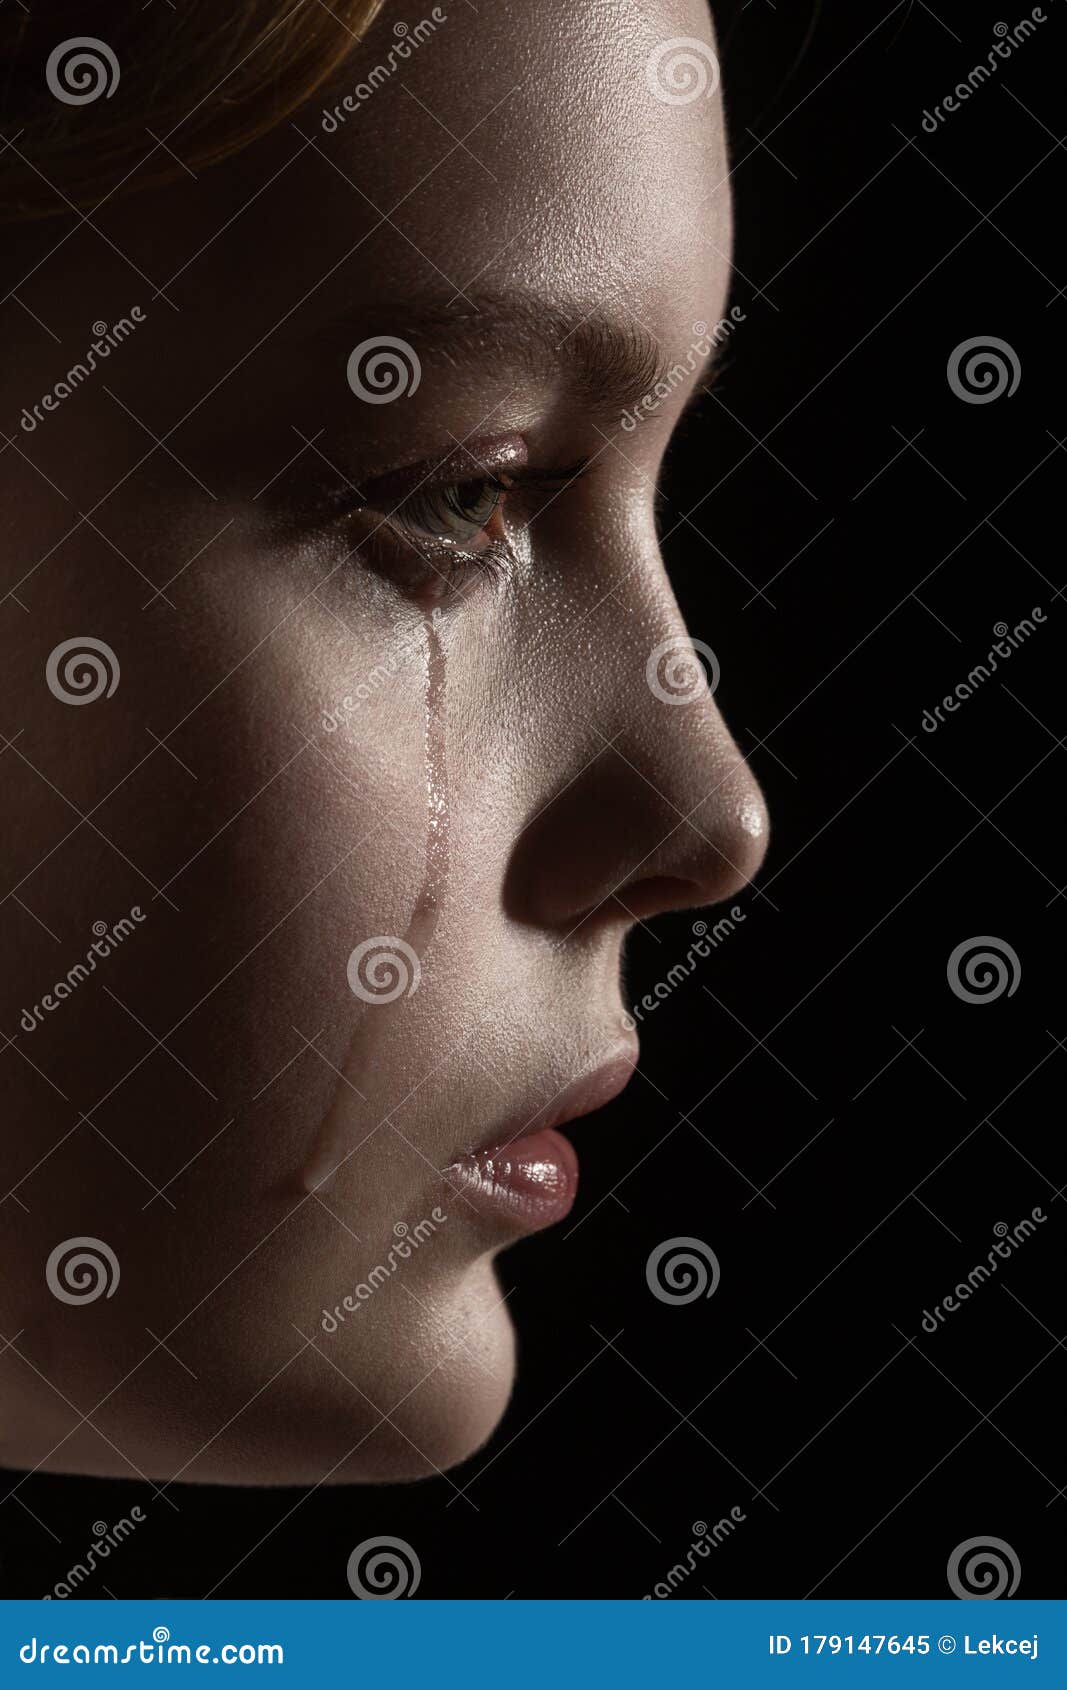 Sad crying girl stock image. Image of hopelessness, disappointment ...